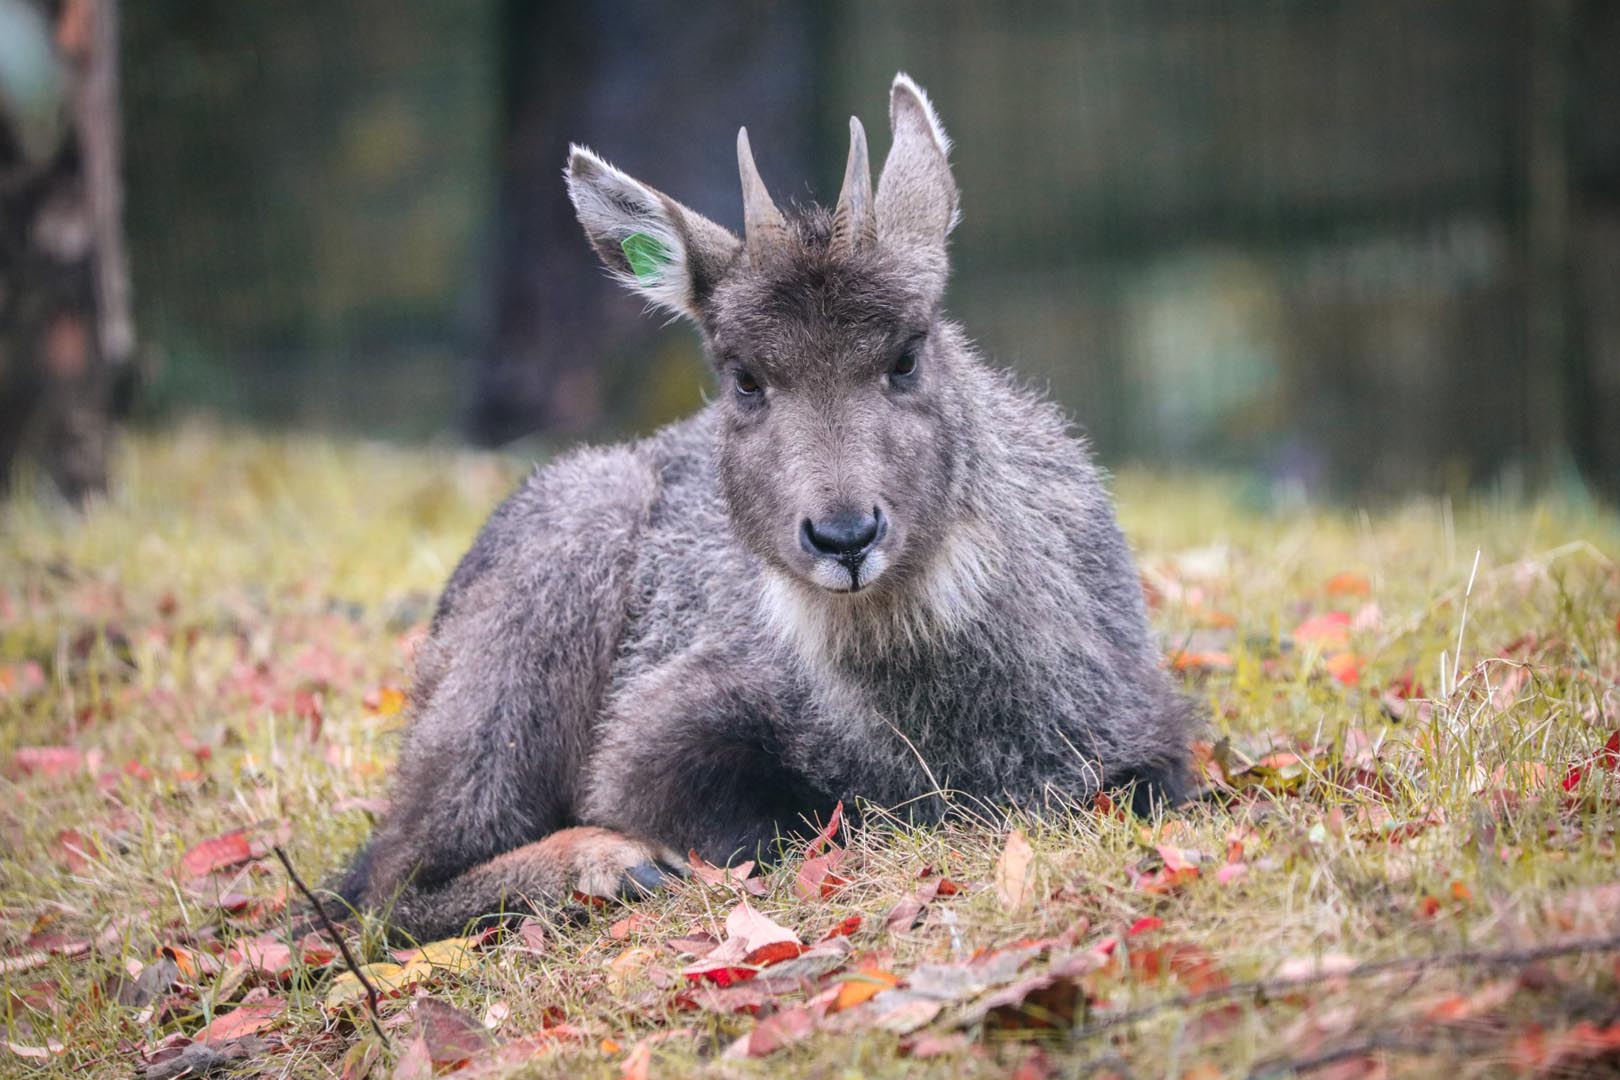 Chinese goral Danling lying down looking to camera (eye contact) Image: Allie McGregor 2023